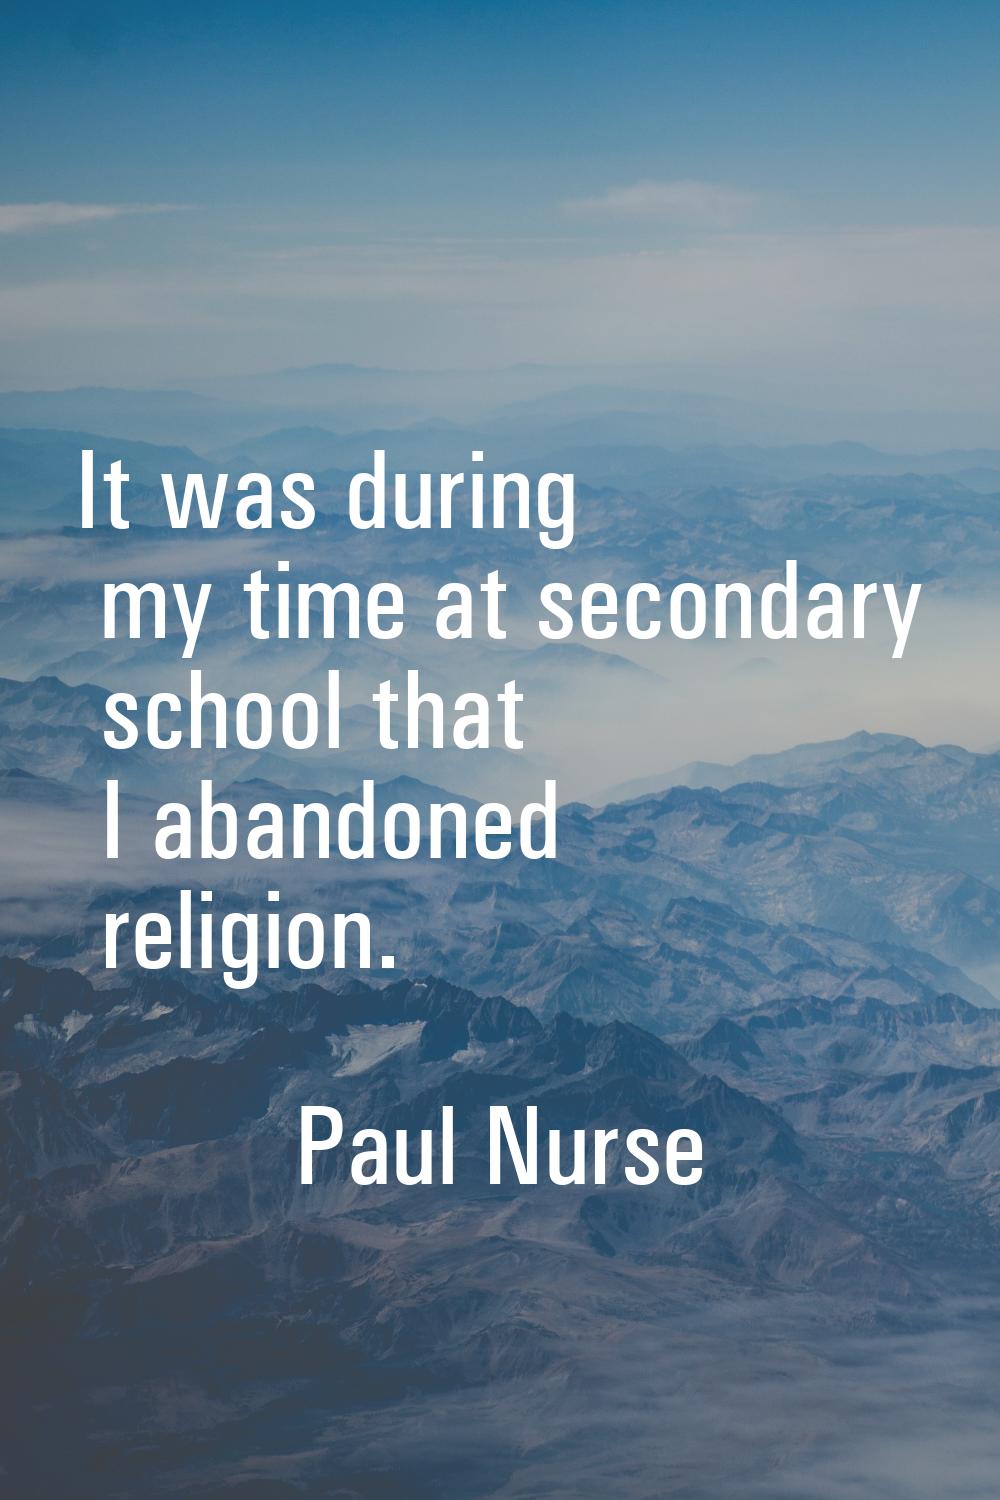 It was during my time at secondary school that I abandoned religion.